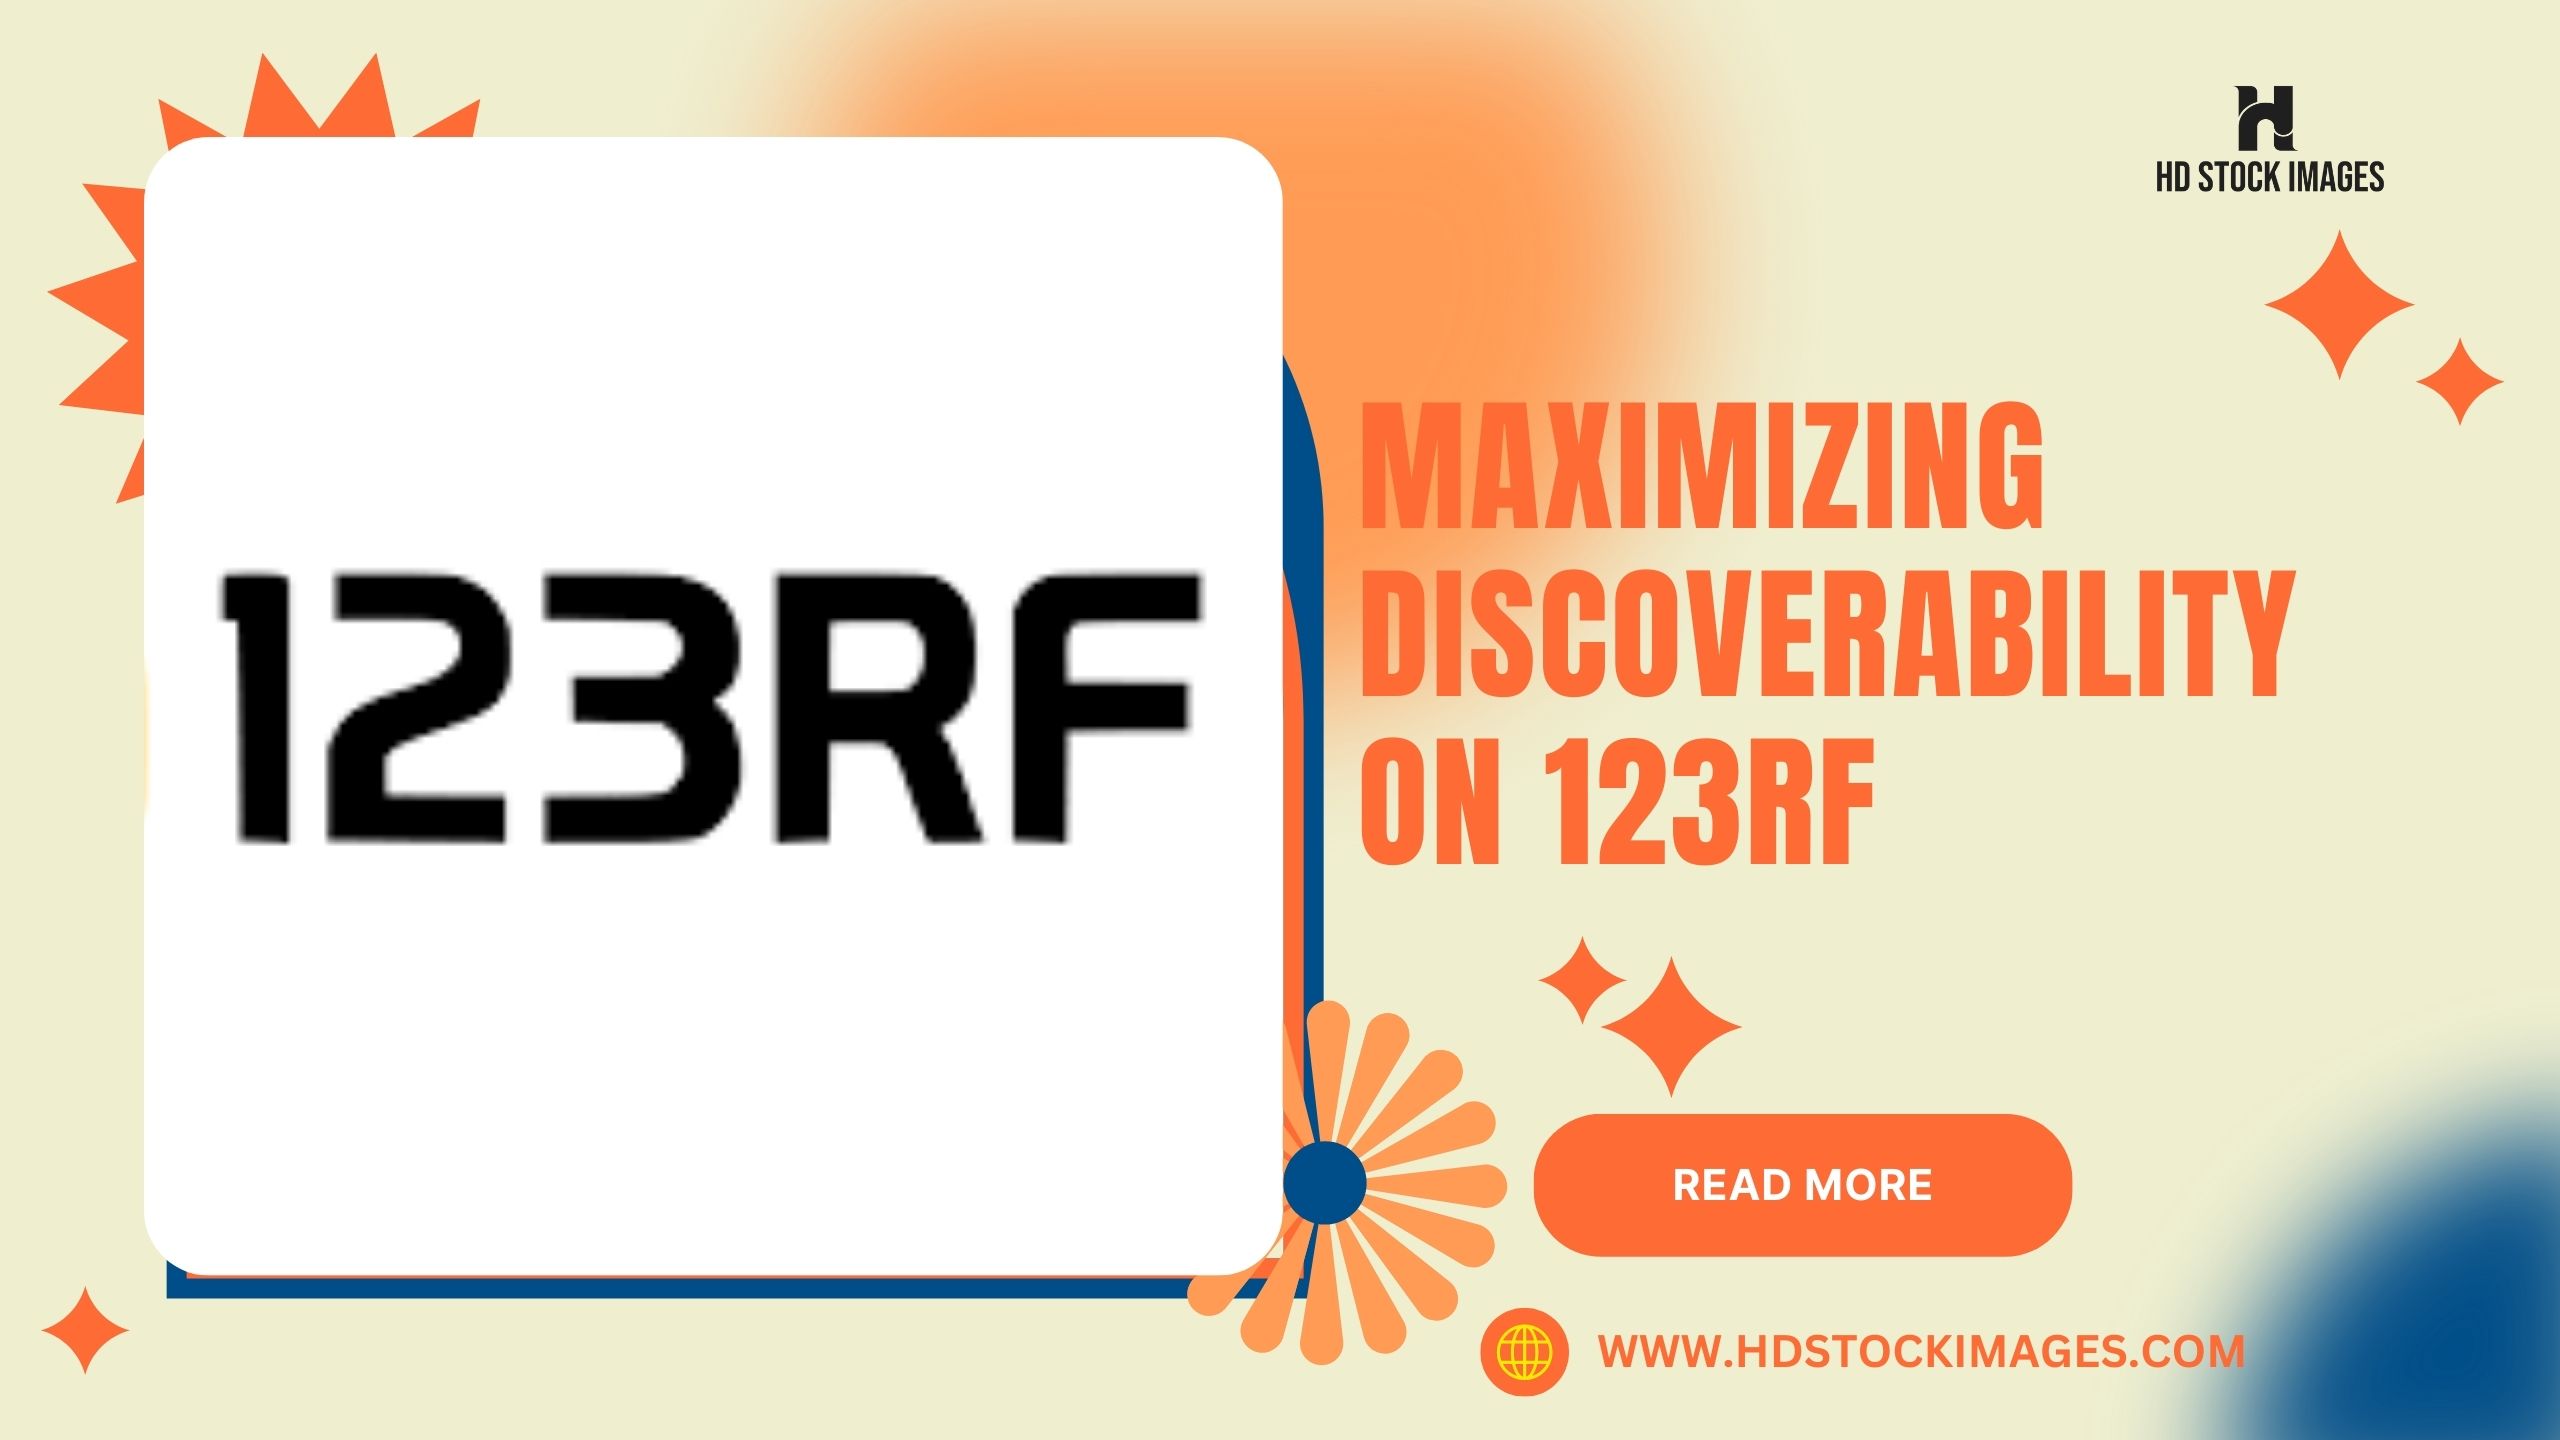 Maximizing Discoverability on 123RF: Tips for Increasing Exposure